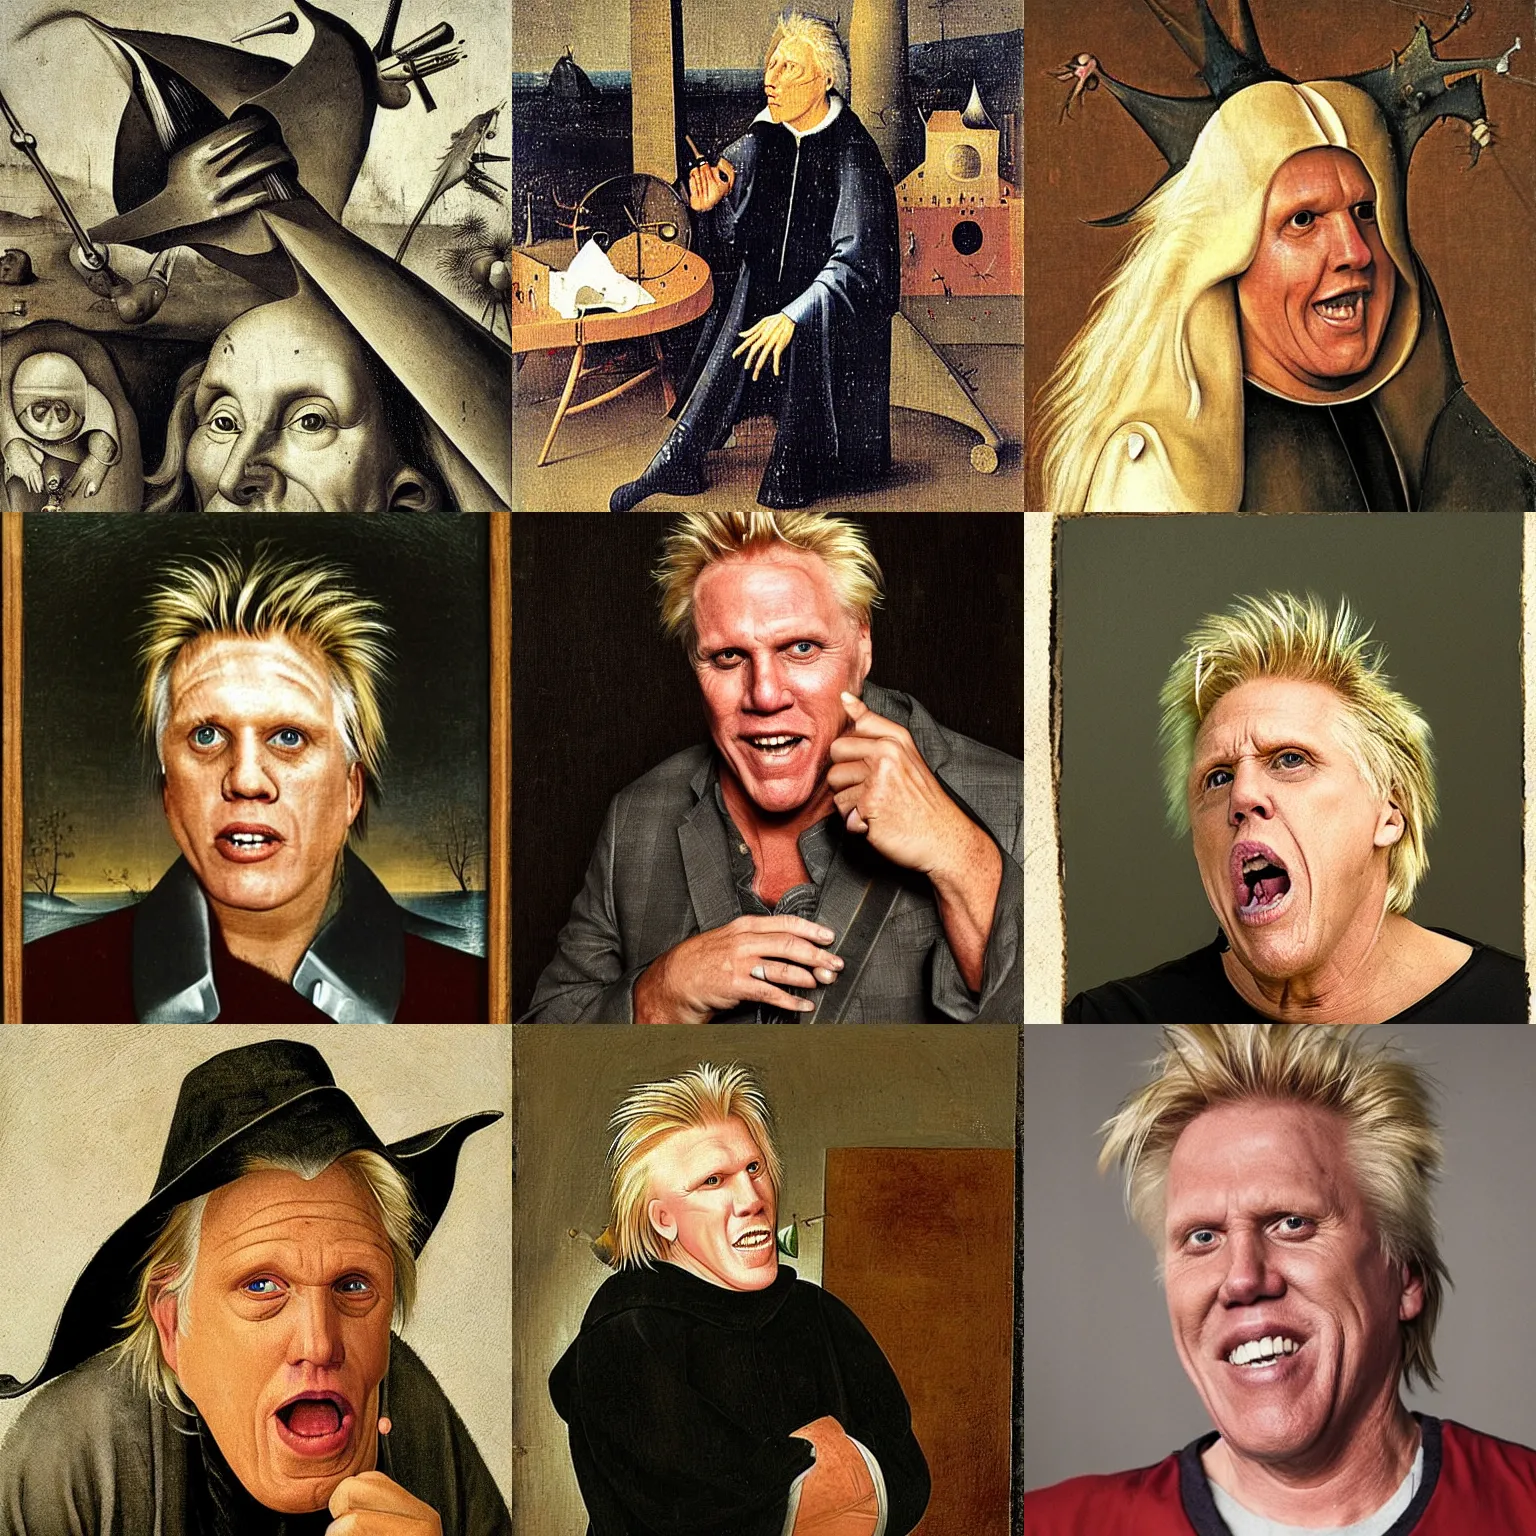 Prompt: Gary Busey by Hieronymus Bosch